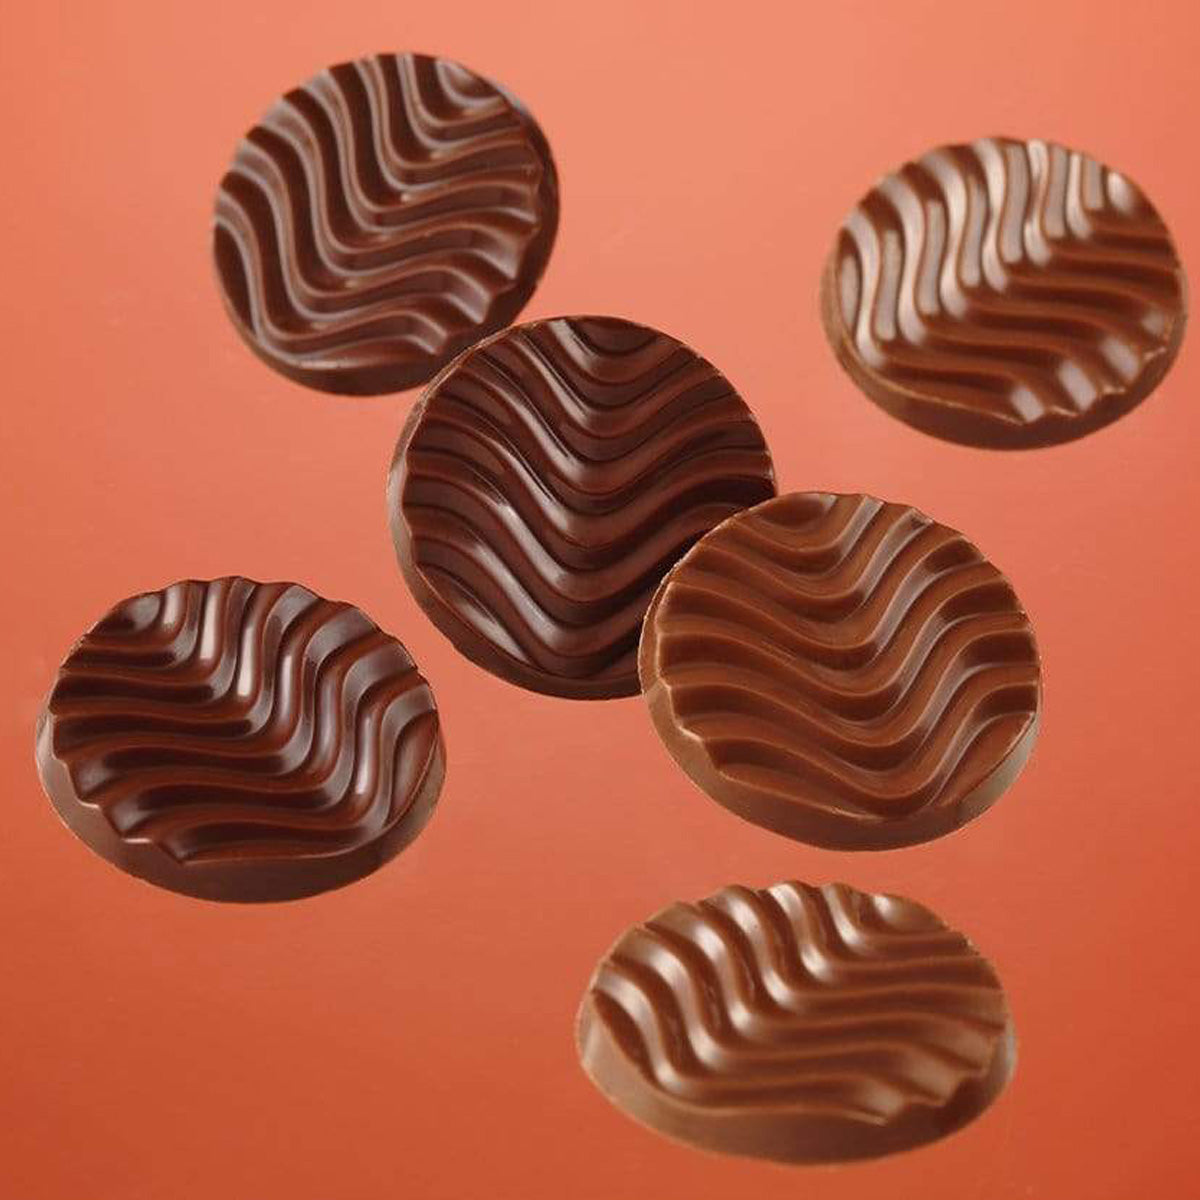 ROYCE' Chocolate - Pure Chocolate "Sweet & Milk" - Image shows brown chocolate discs with a waved texture. Background is in color red-orange.